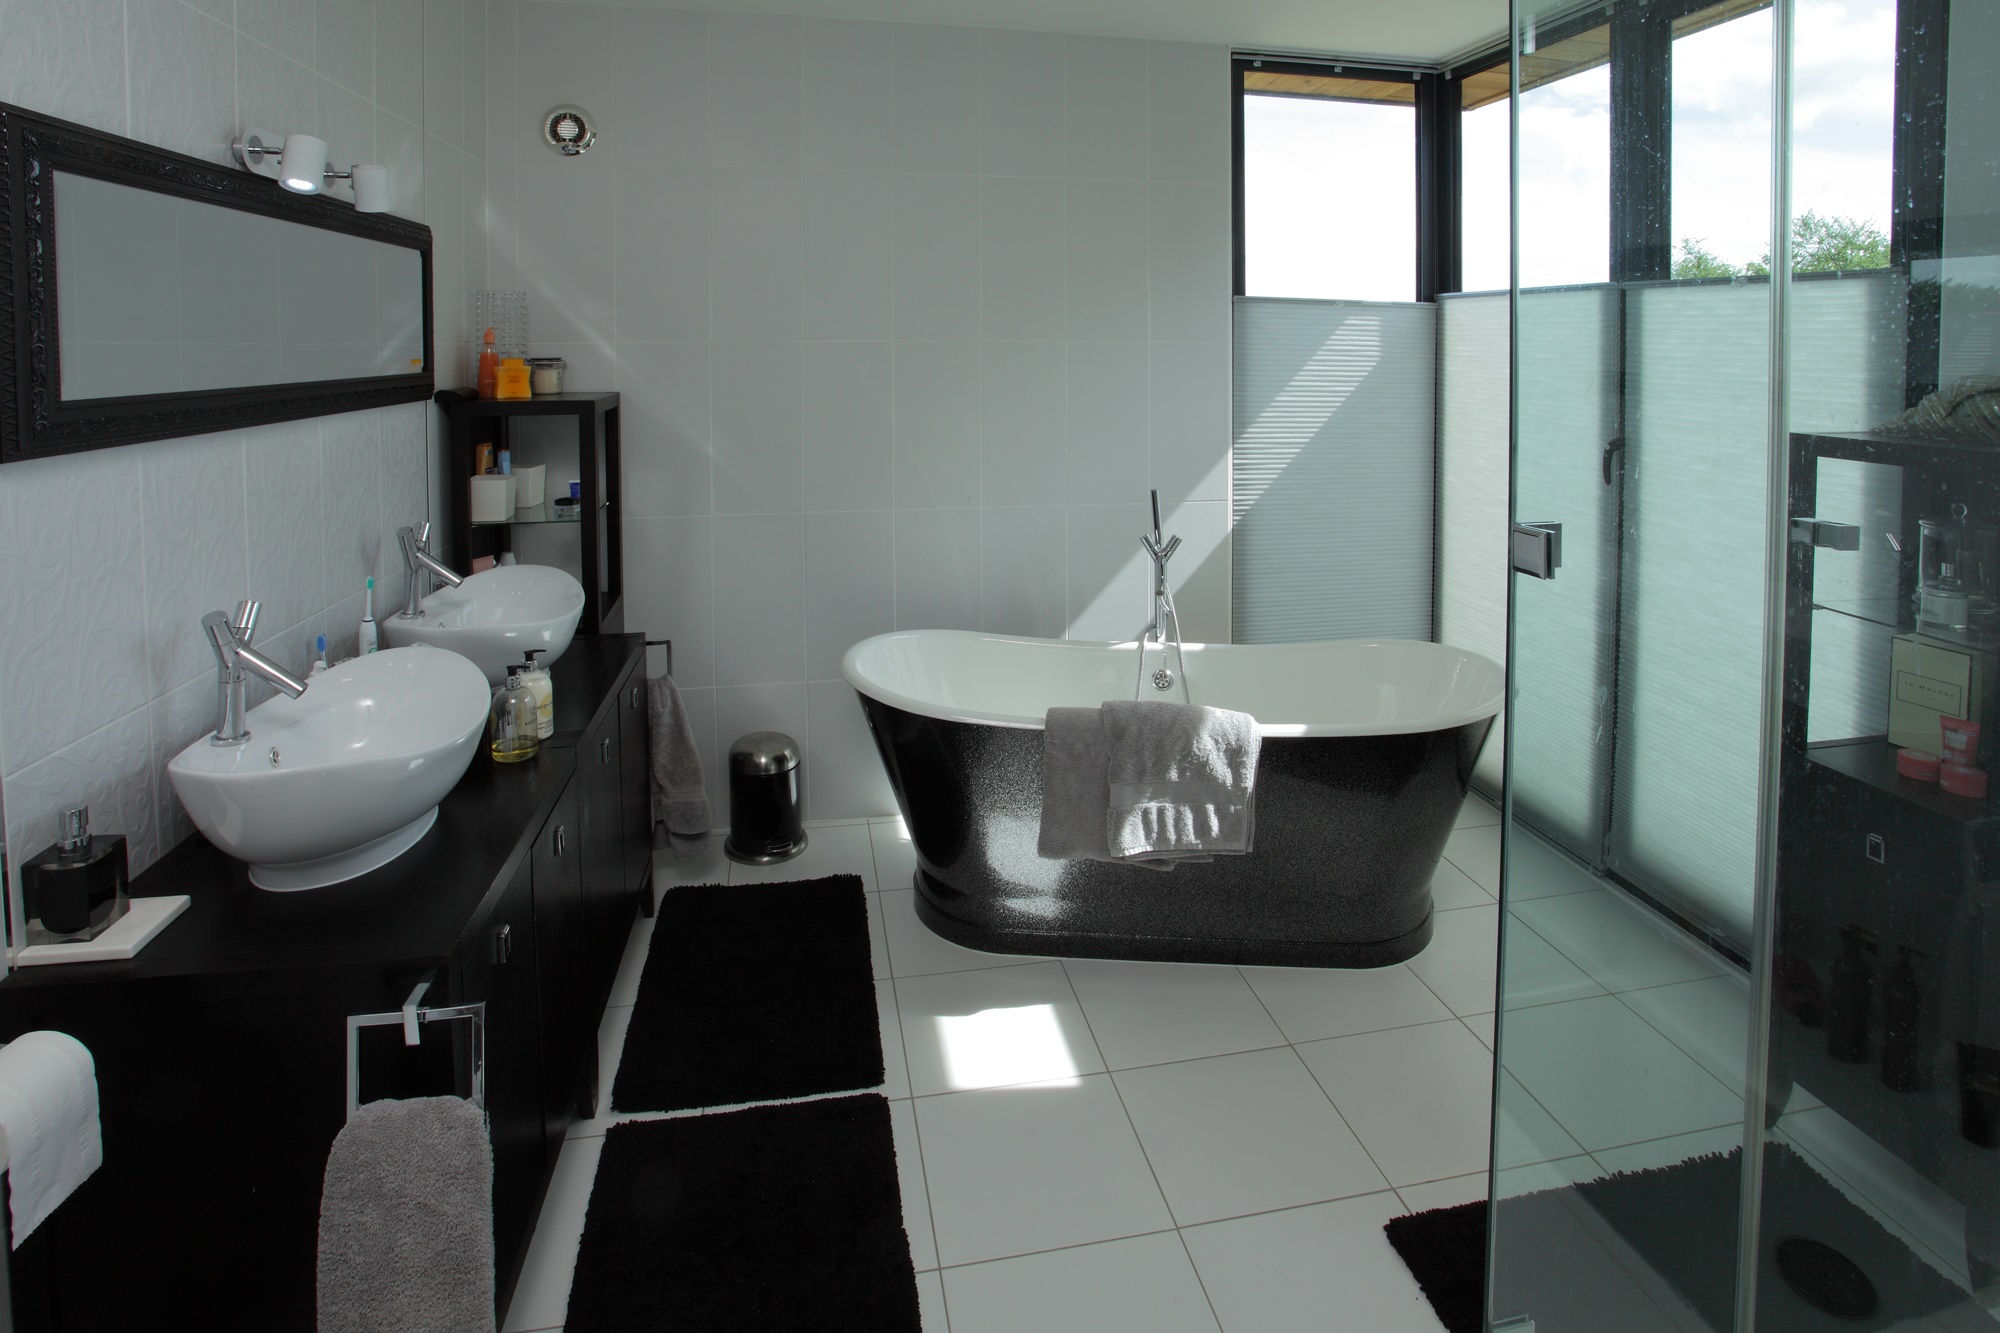 The bathroom with a large bathtub, double sinks and shower with glass surroundinside the grade listed house